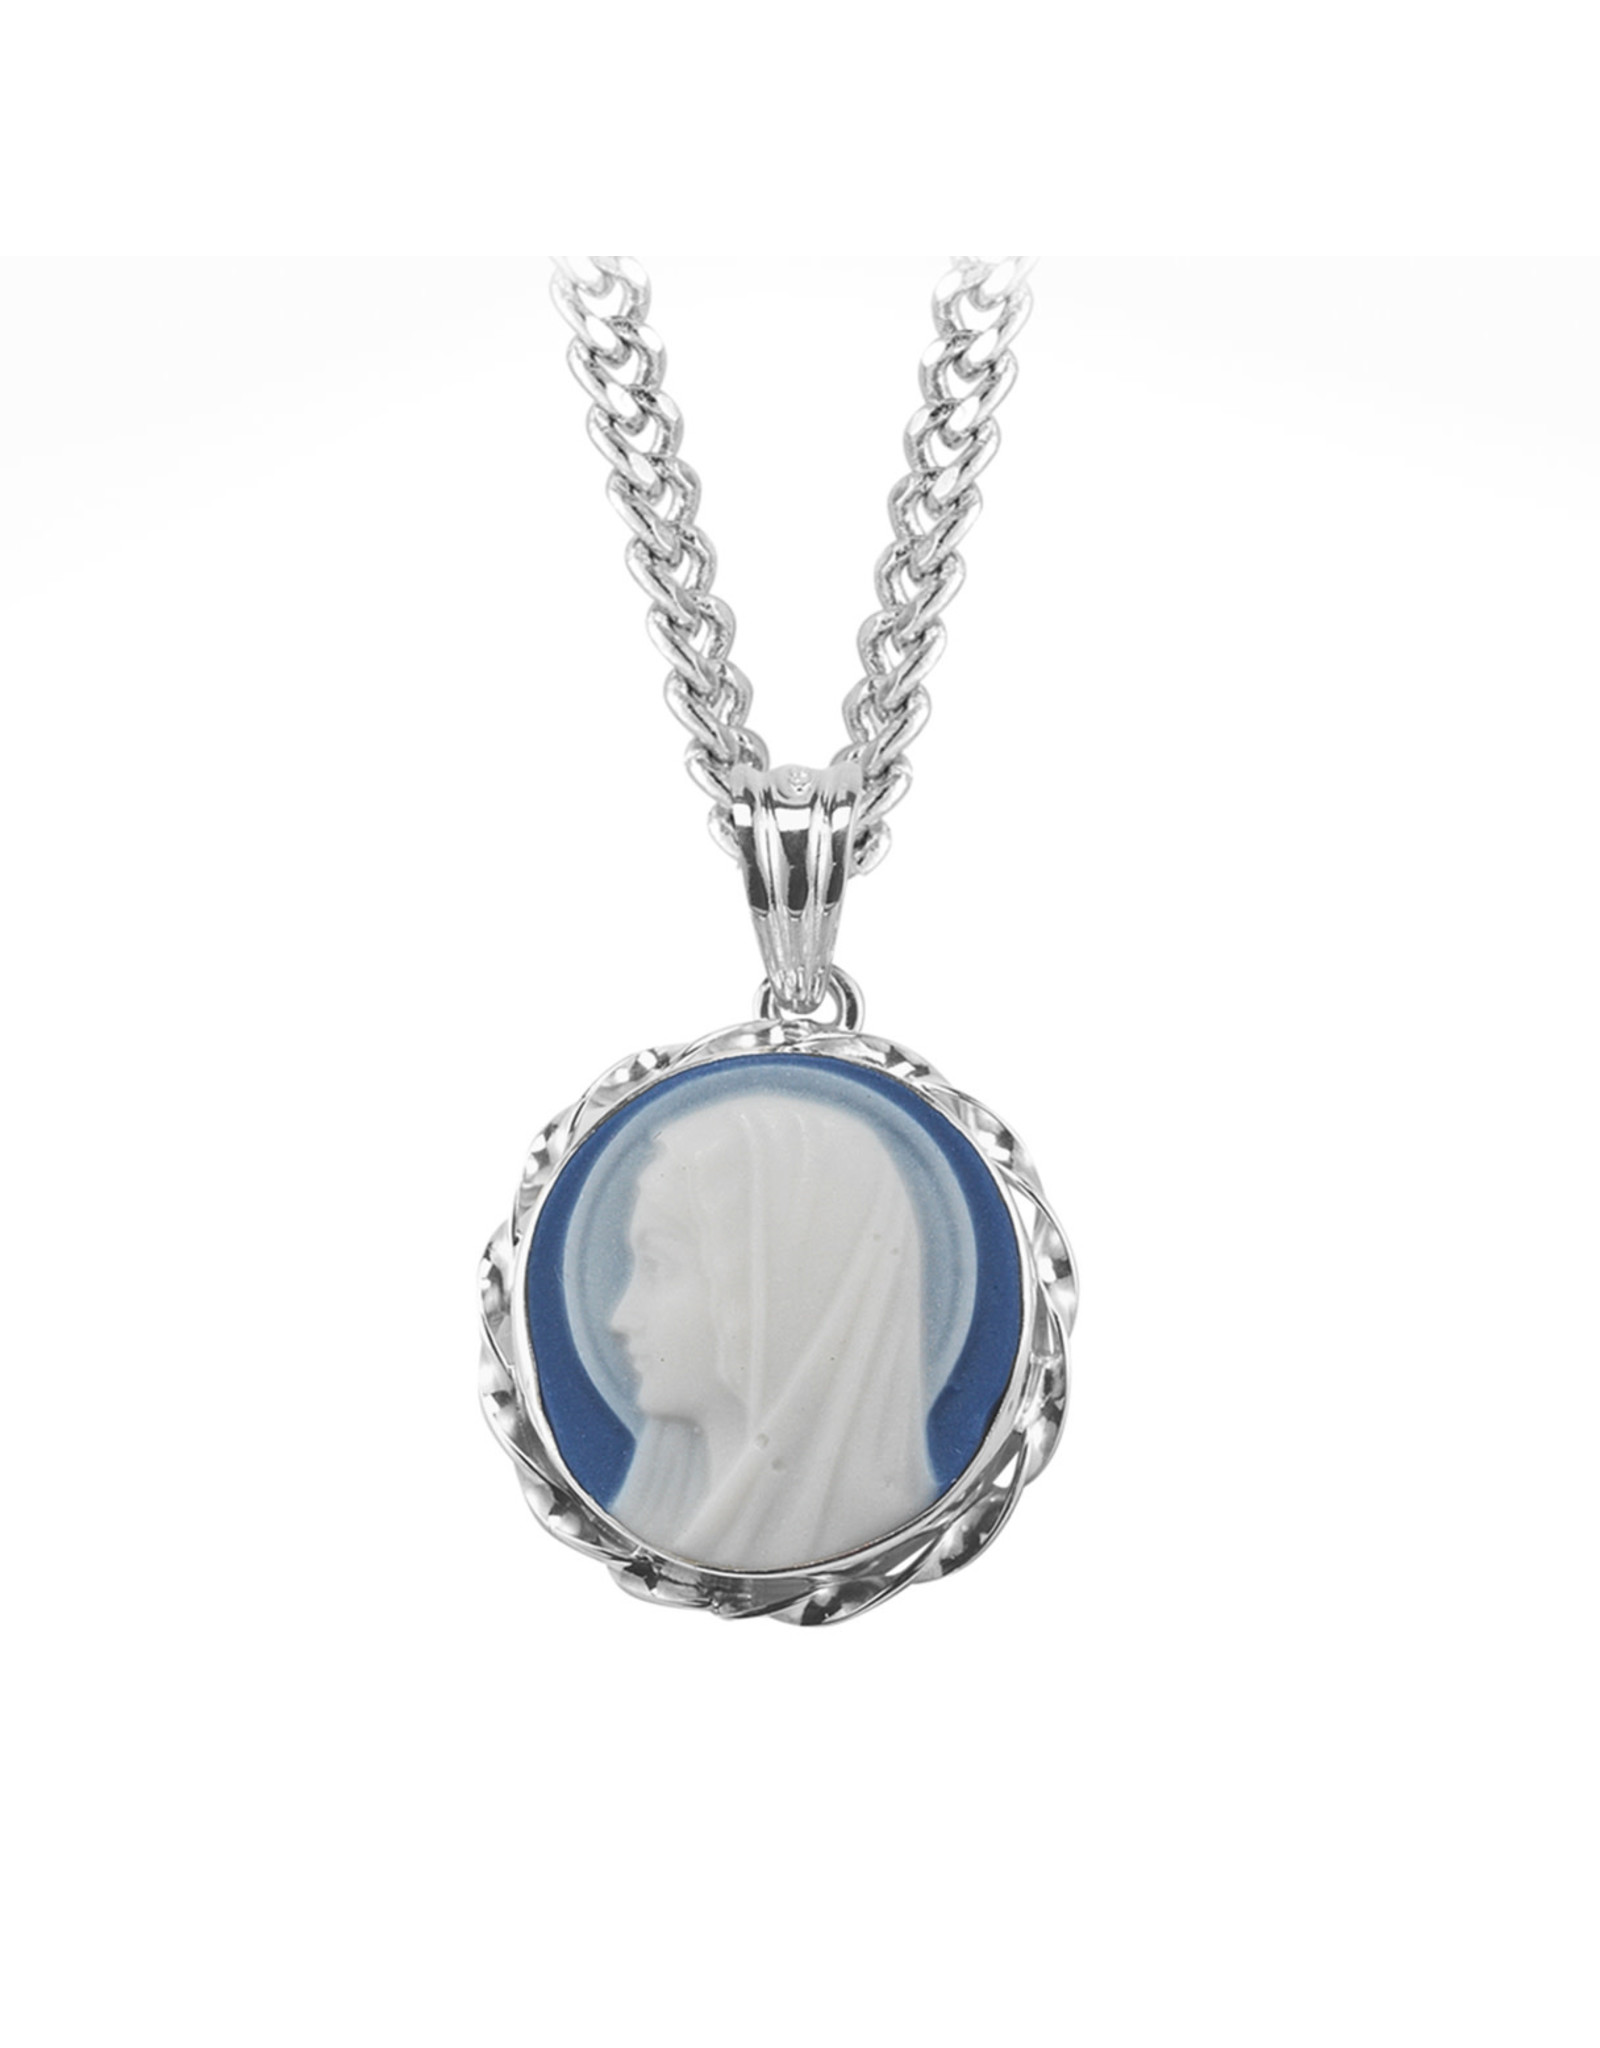 HMH Blue Madonna Profile Cameo Medal, Sterling Silver, 18" Chain